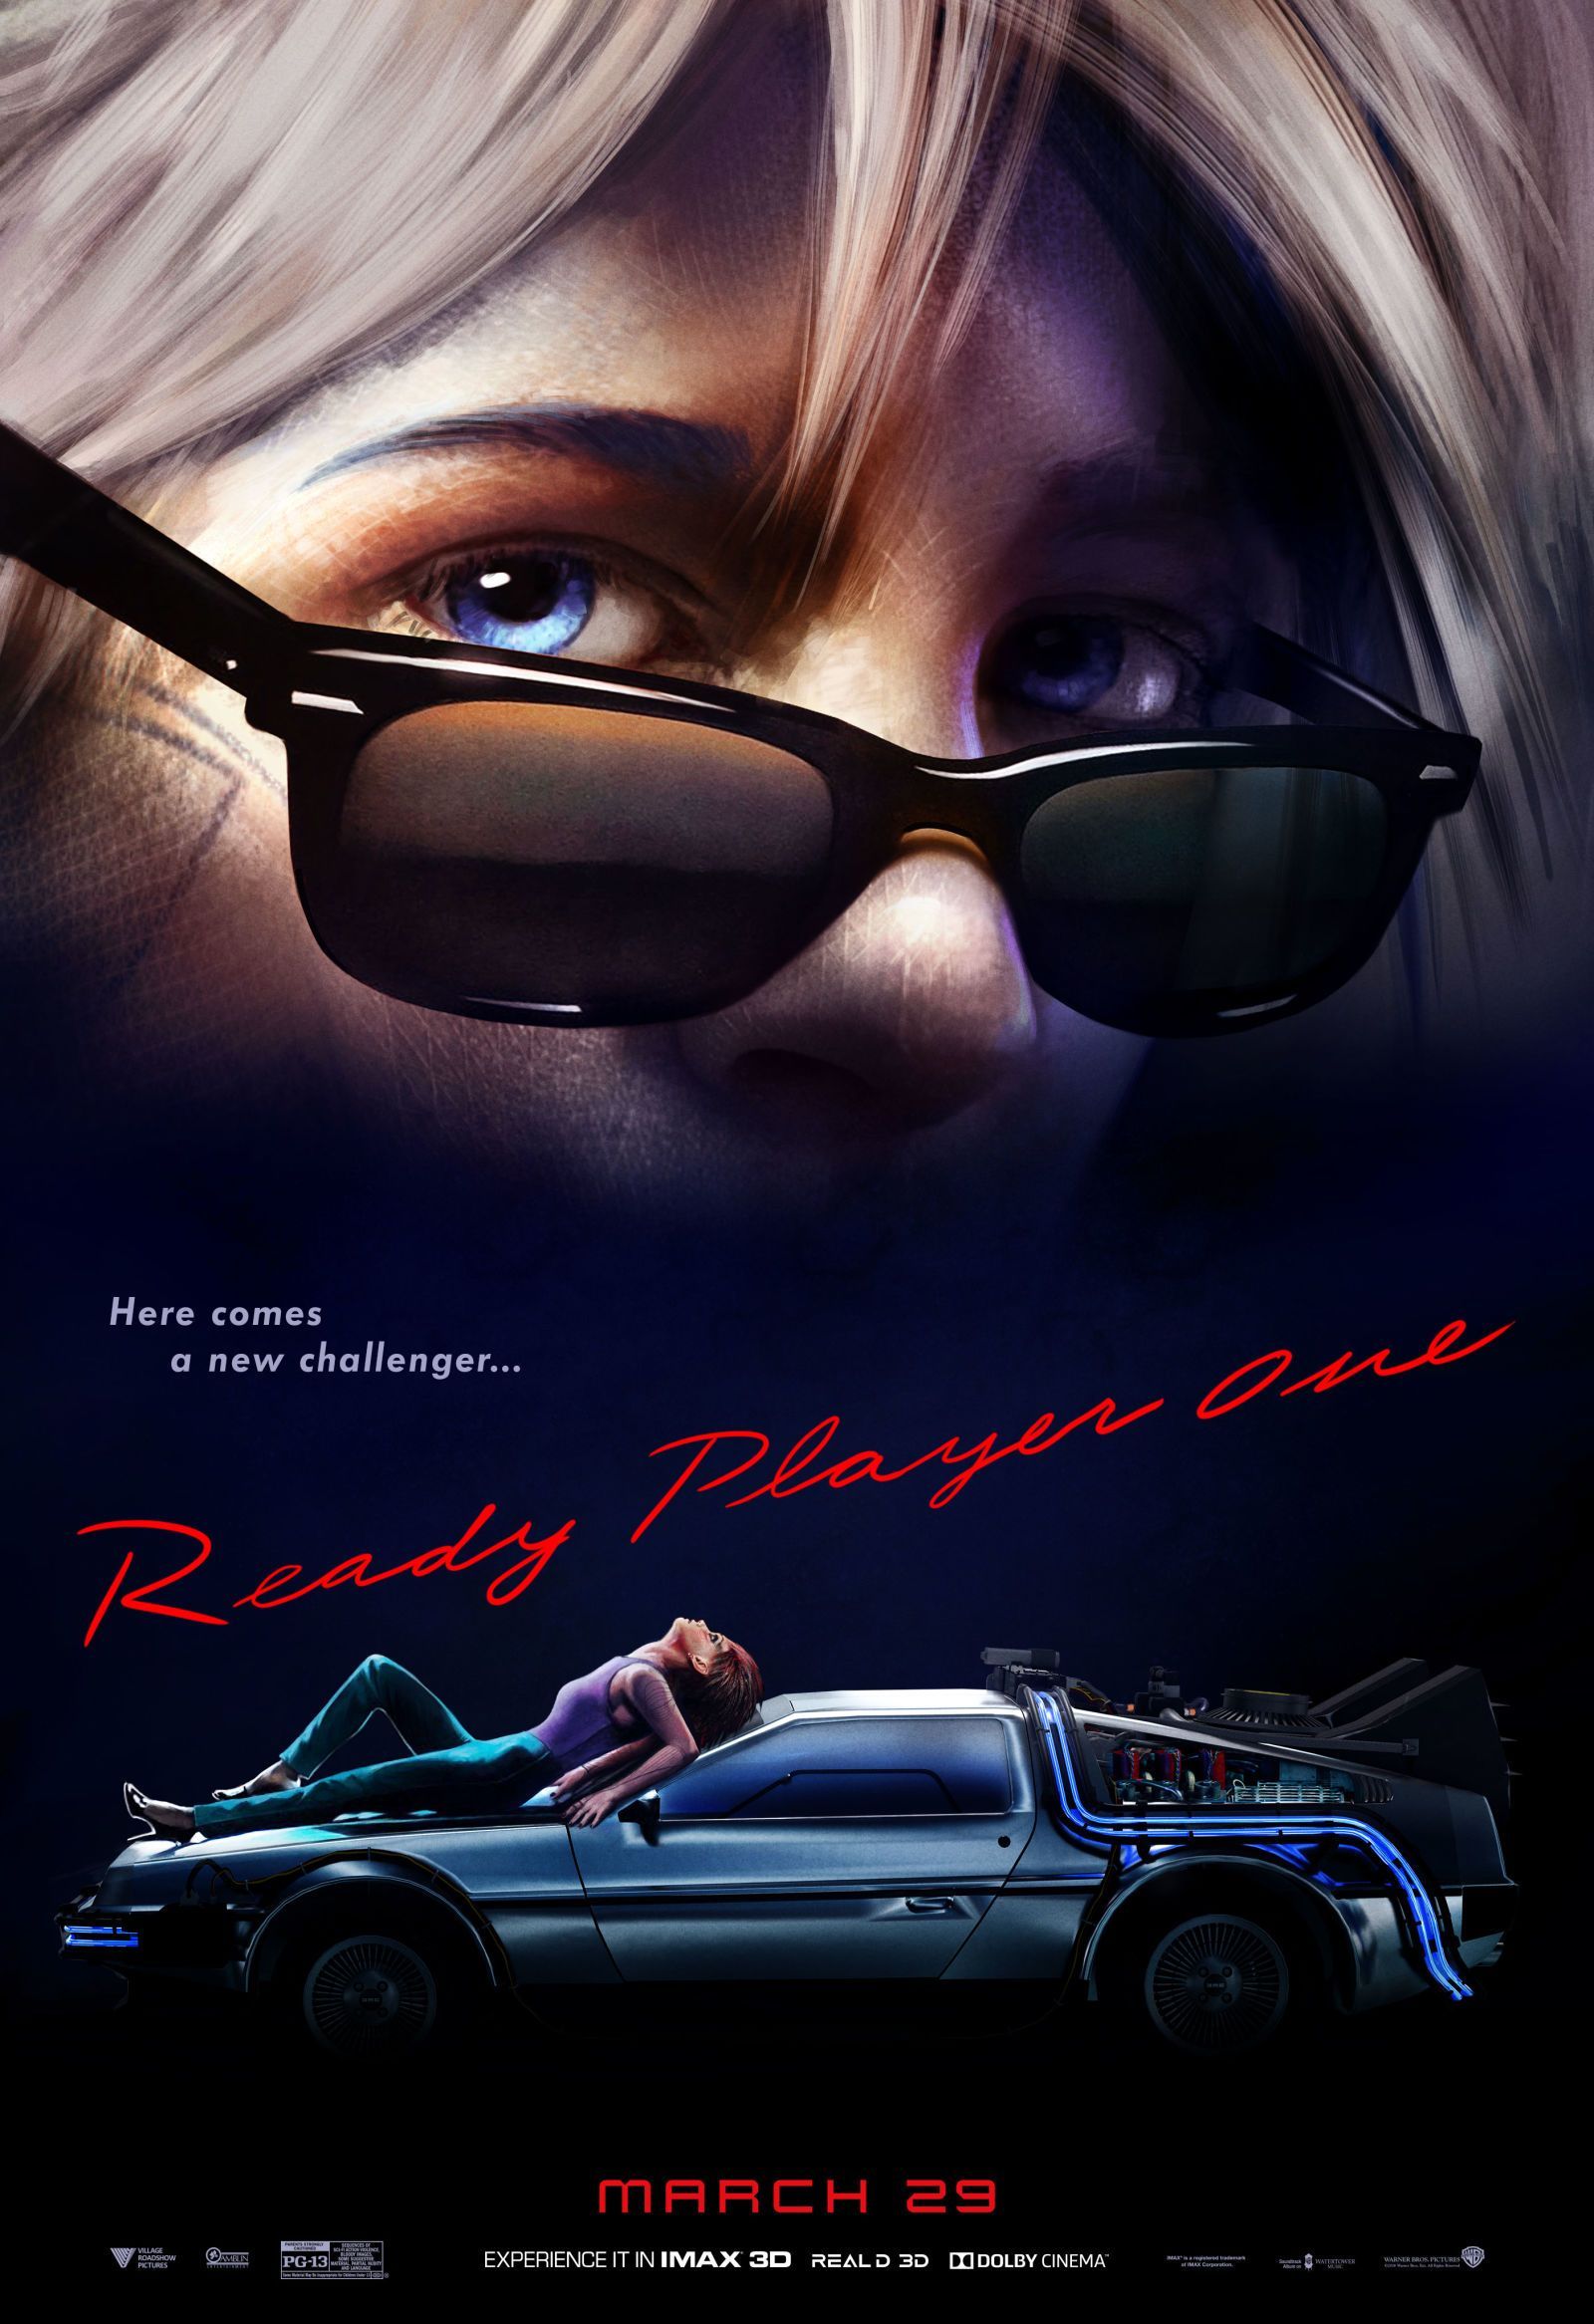 Risky Business Styled Movie Poster for Ready Player One. Ready player one movie, Ready player one, Player one